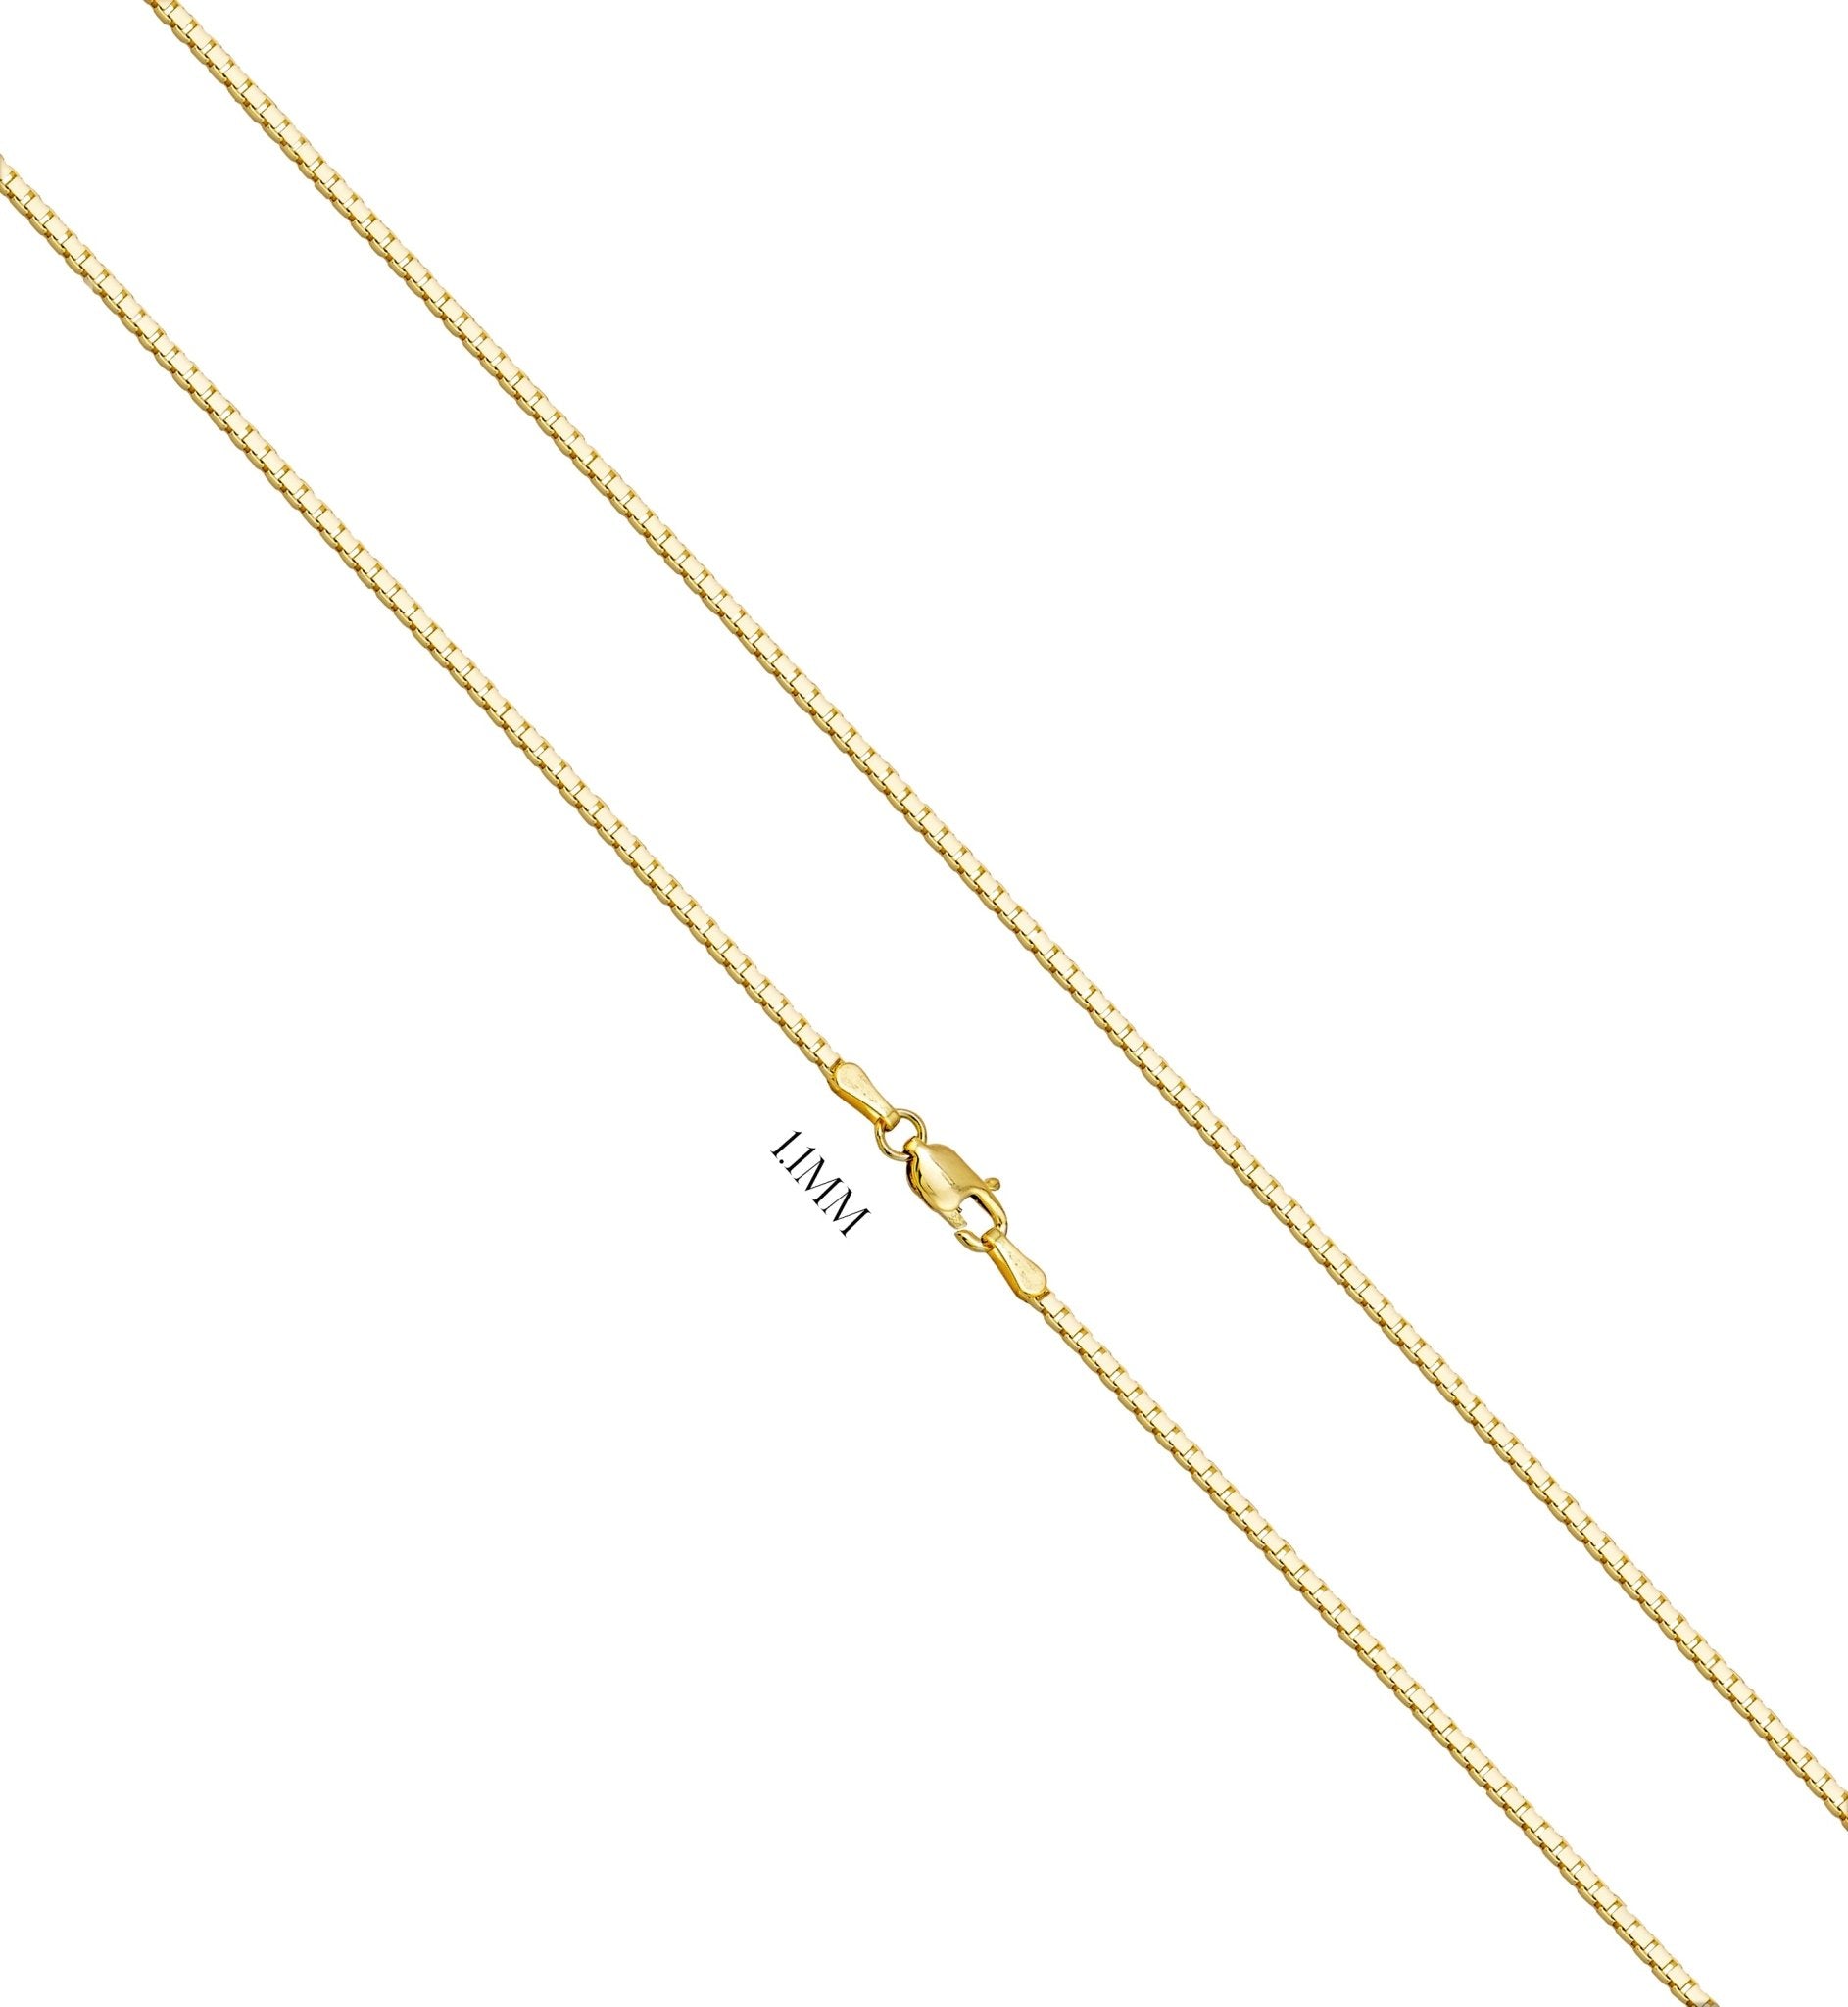 Buy 14K Solid Yellow Gold Box Chain Necklace, 13 to 30 Inch, 0.5mm to 1.6mm  Thick, Real Gold Chain, Box Link Chain, Box Chain Gold, Online in India -  Etsy